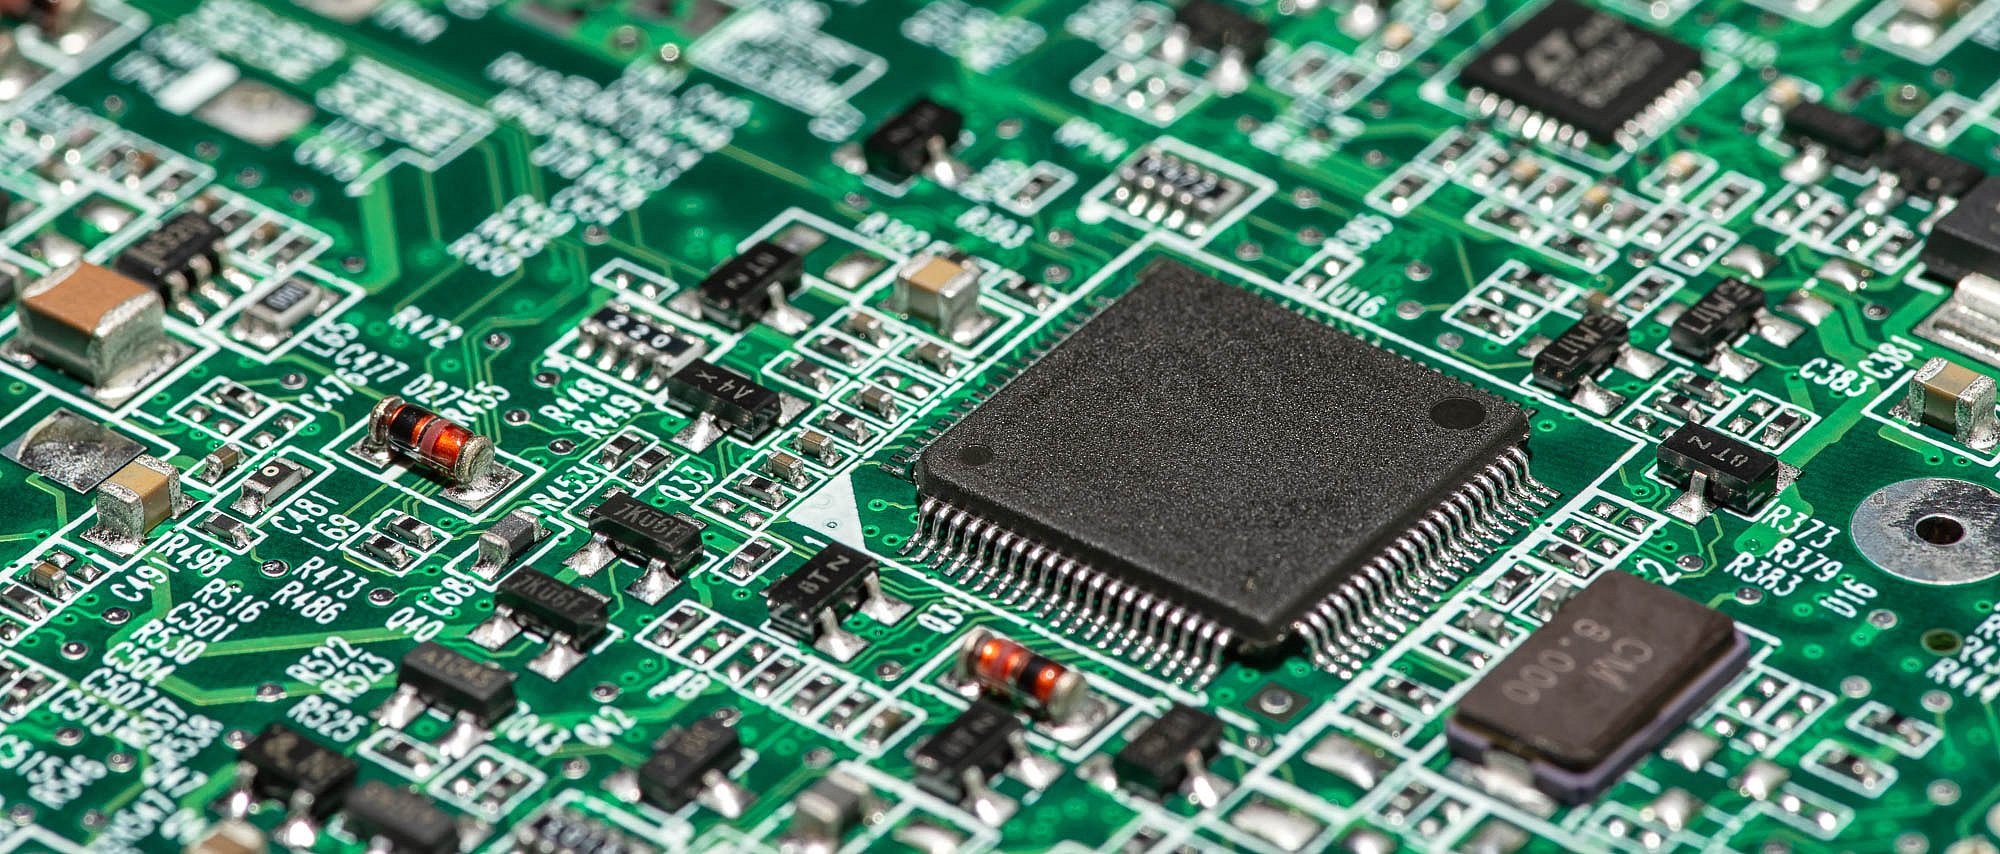 Macro image of a green computer printed circuit board with selective focus on an blank chip